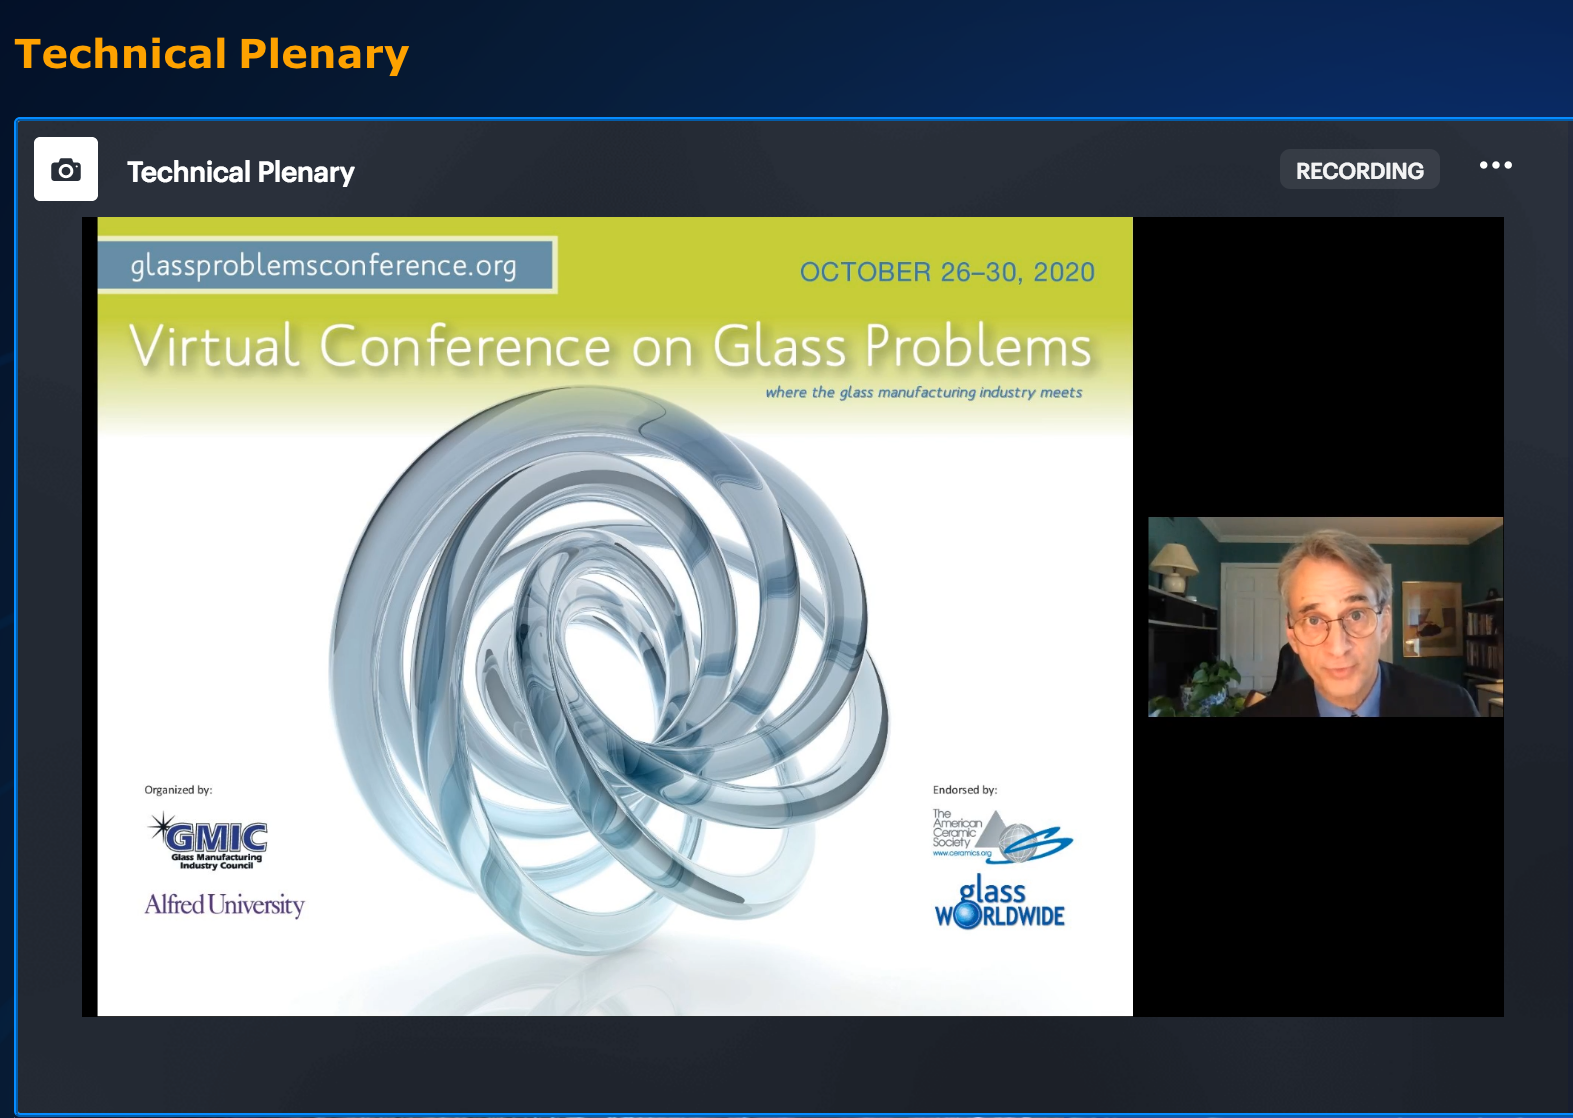 From automation to sustainability, the Virtual Conference on Glass